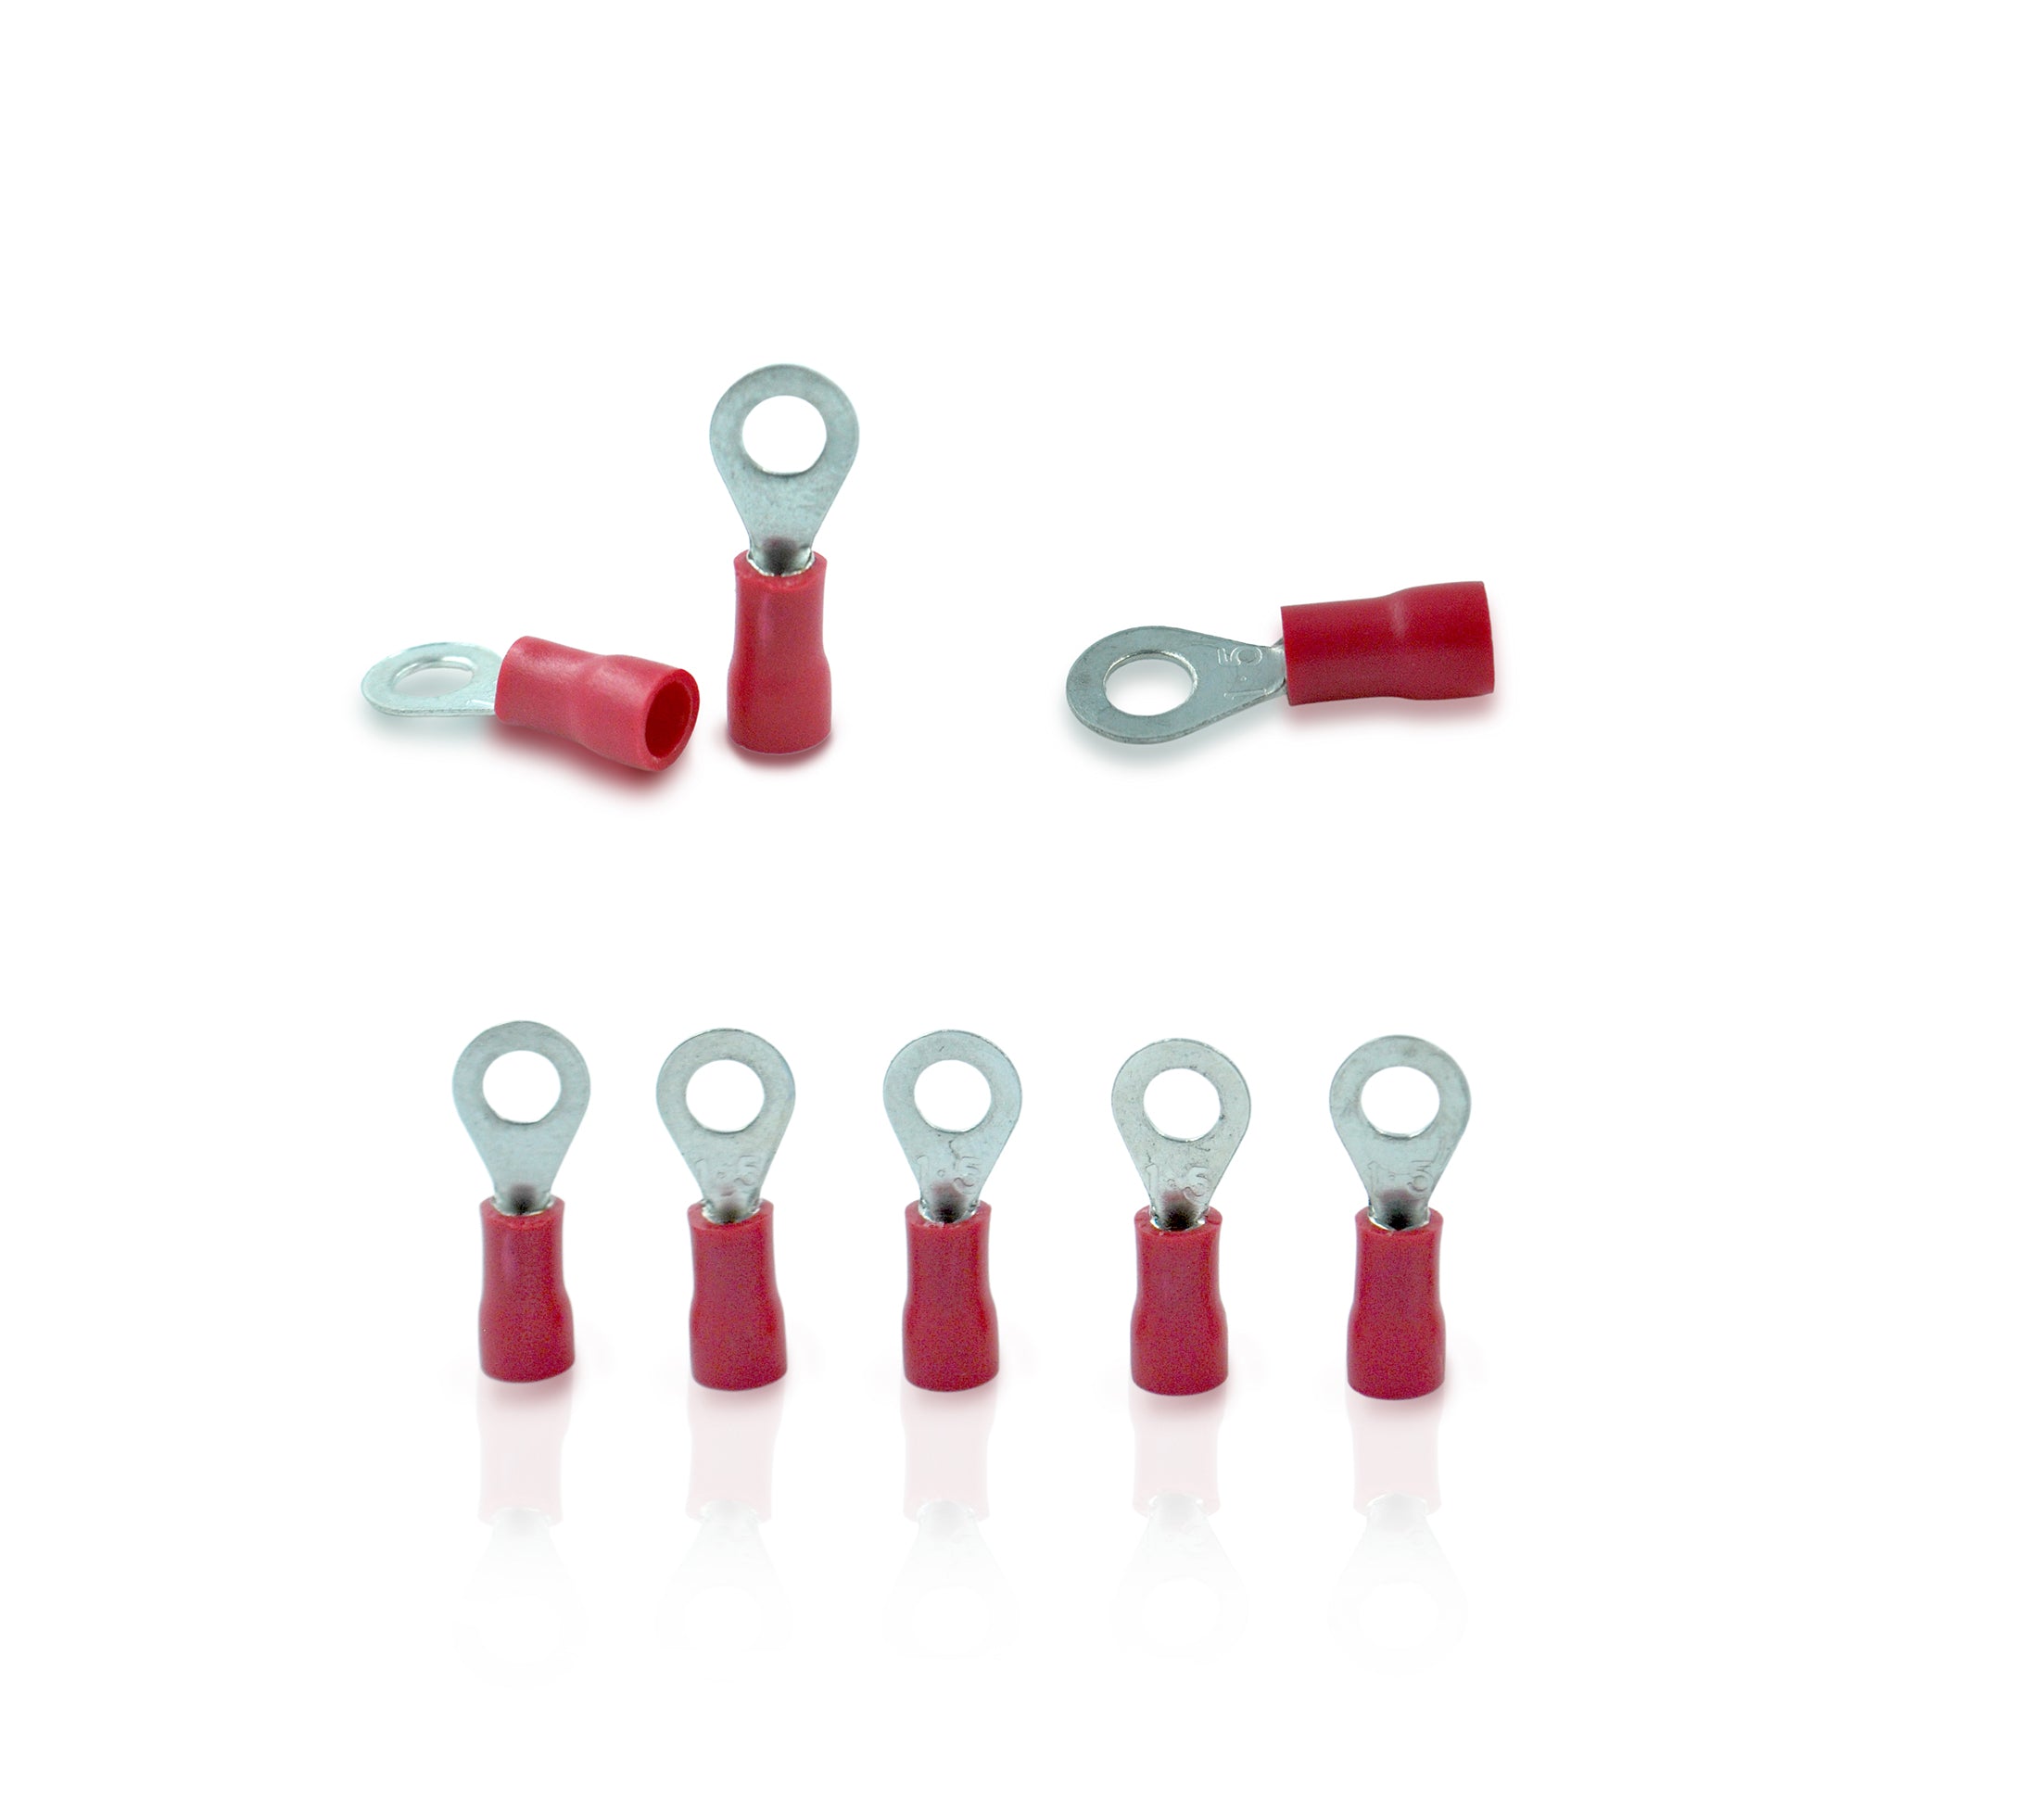 Ring Insulated Electrical Wire Crimp Terminals Connectors – E-Copper Wire Lug Battery Cable Ends Eyelets (Fit Cable Size: 4.2 mm Bolt Mouth Size: 4 mm)